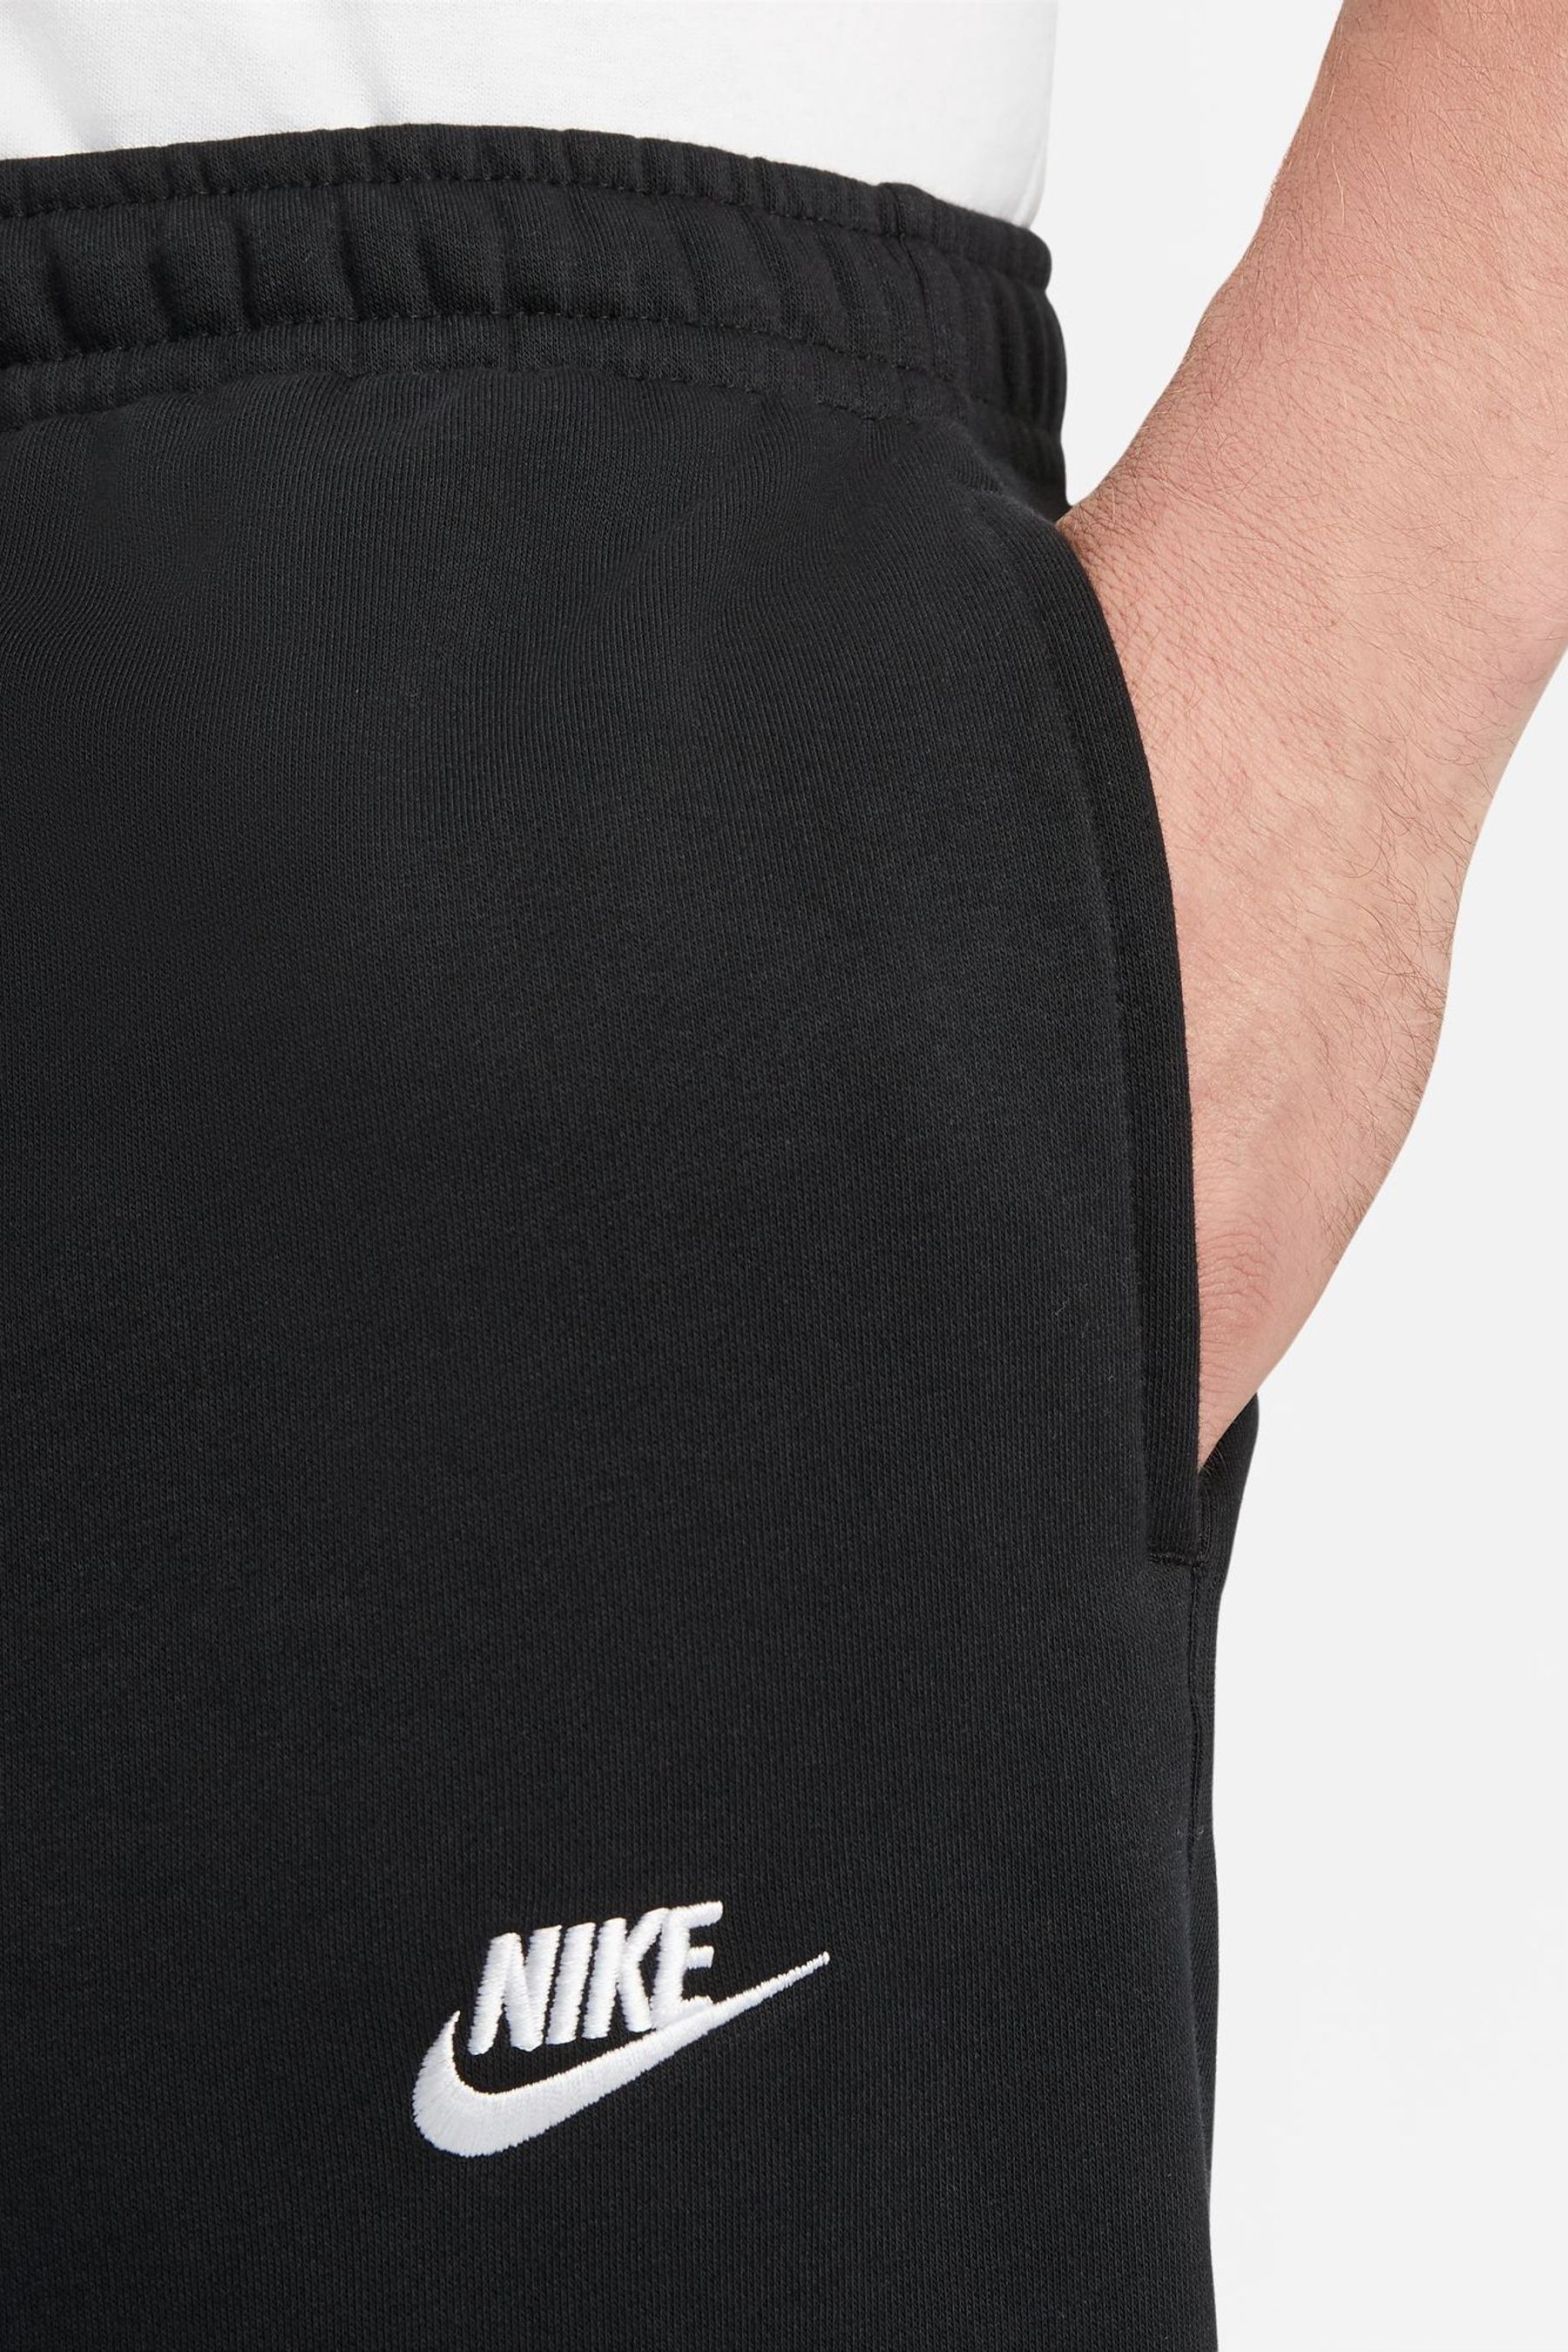 Buy Nike Black Club Cuffed Joggers from the Next UK online shop